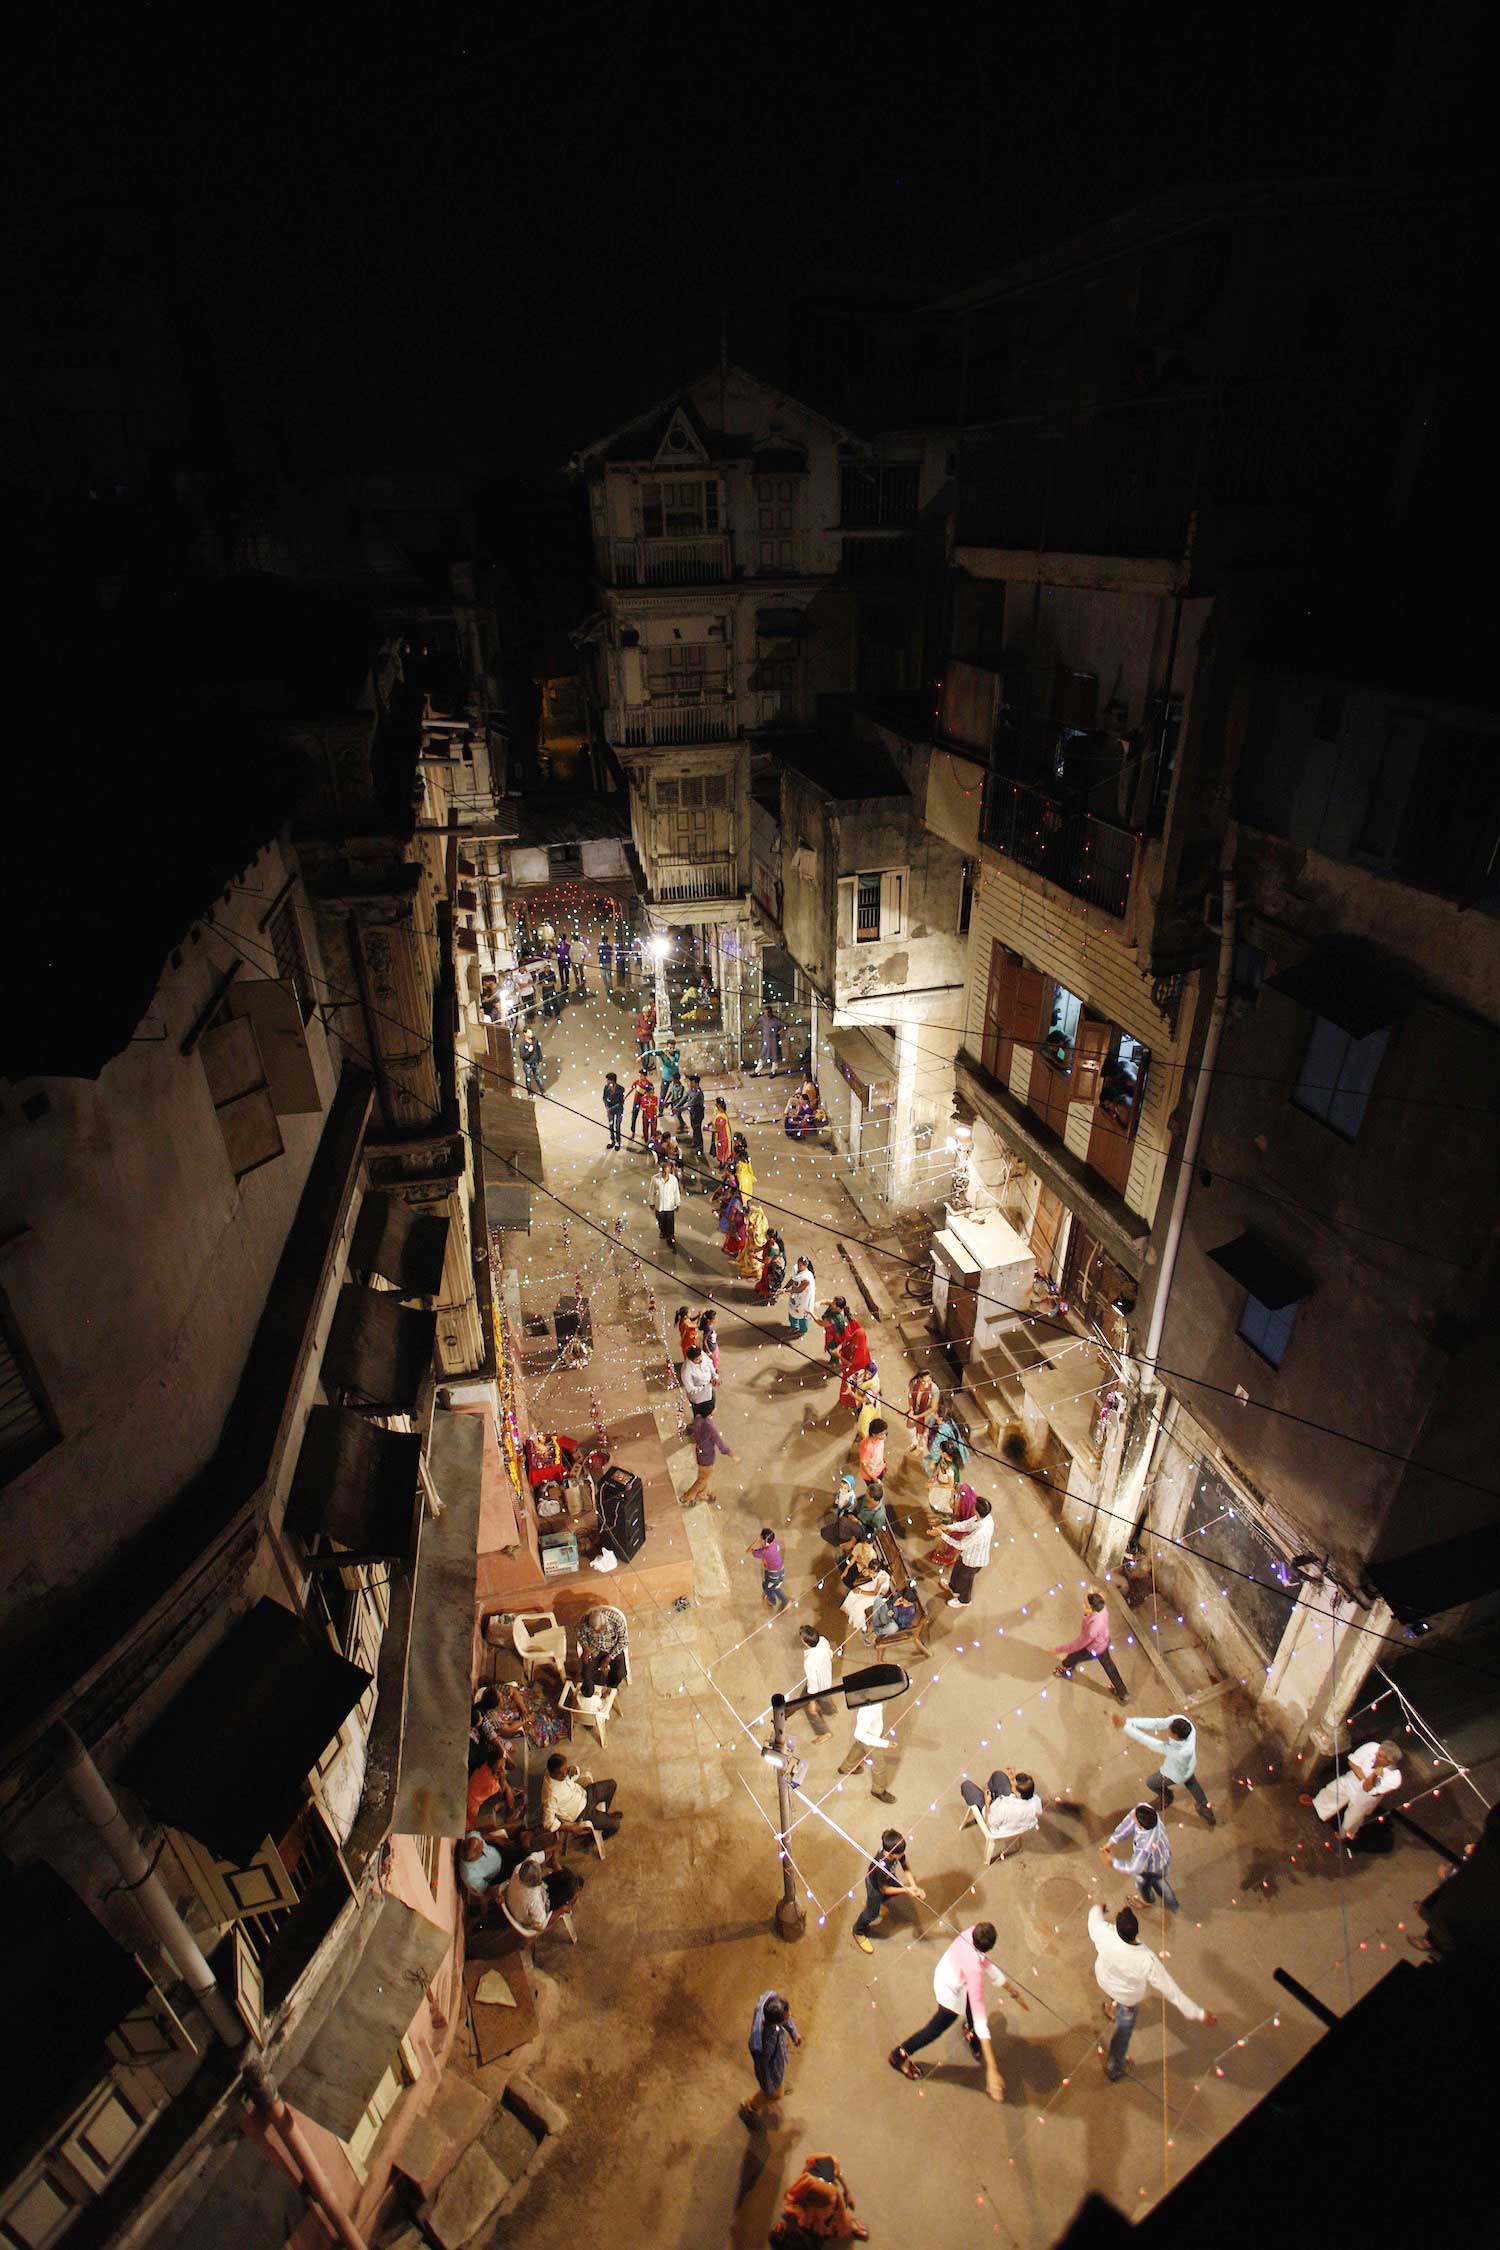 Old part of town (pols) Traditional neighborhoods and oldest part of Ahmedabad, the capital of Gujarat. Pols consist out of many small communities, grouped by cast or profession. I asked locals for their permission to climb their rooftops, or enter their bedrooms to get this viewpoint.